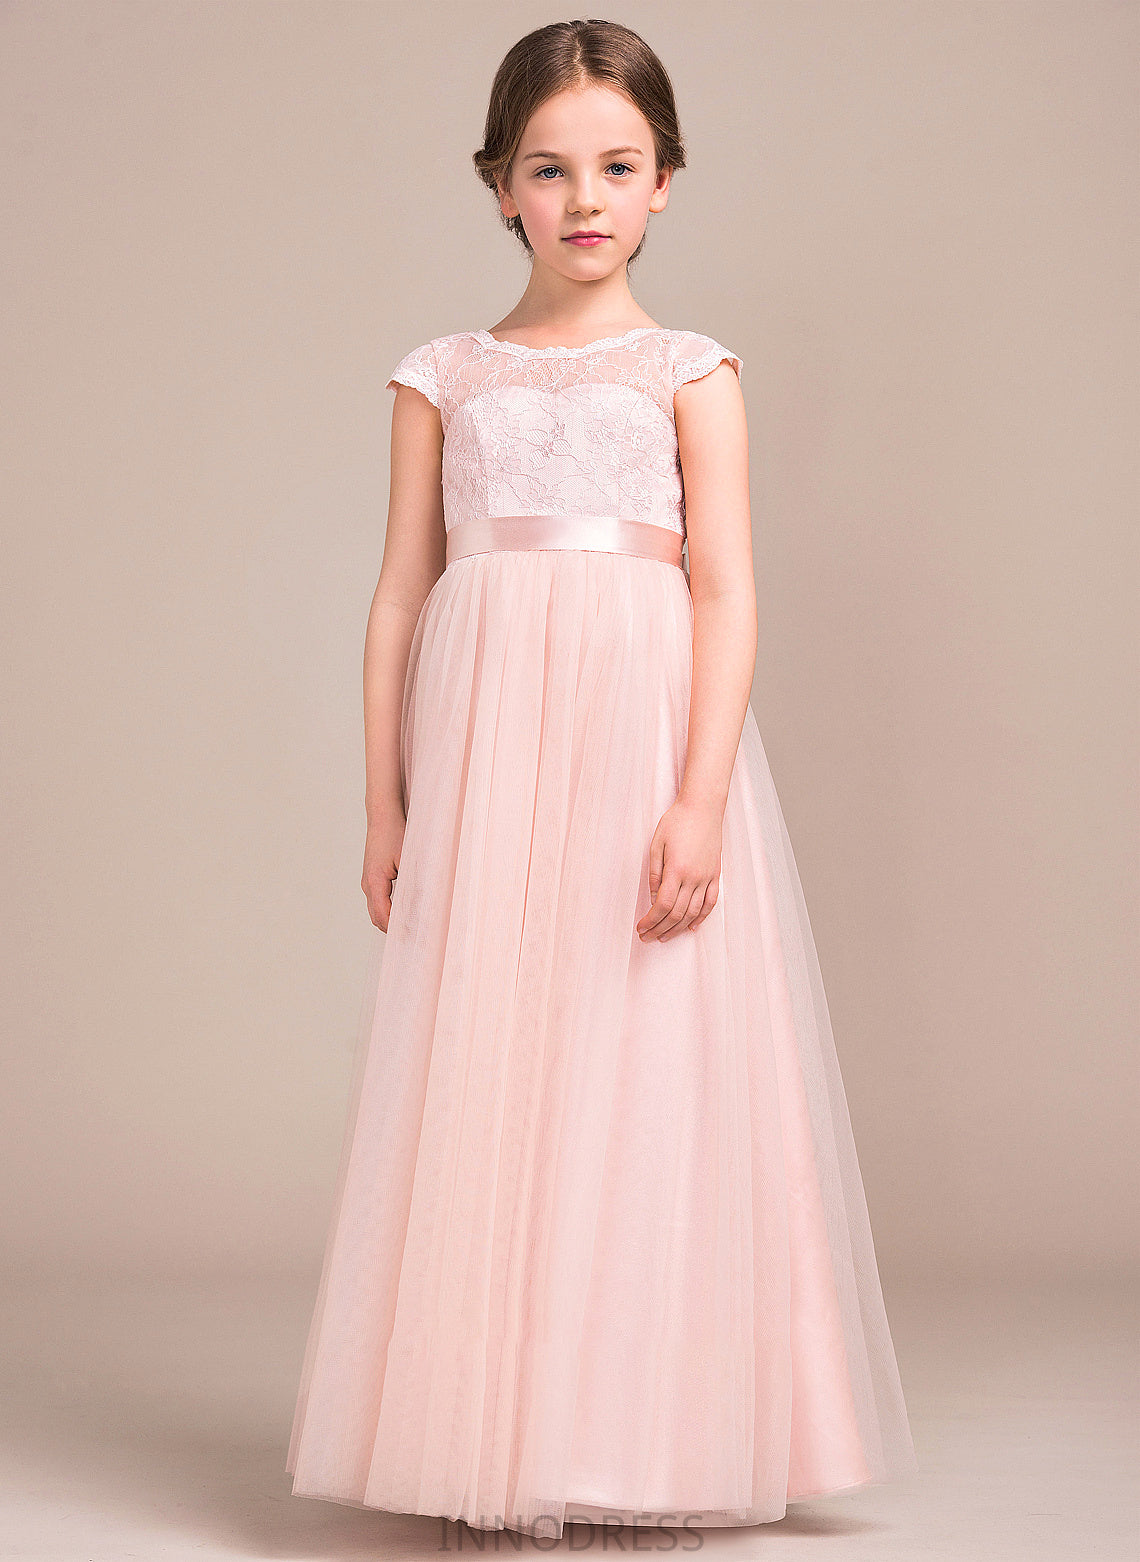 Junior Bridesmaid Dresses Scoop Tulle Bow(s) With Neck Floor-Length Brianna A-Line Lace